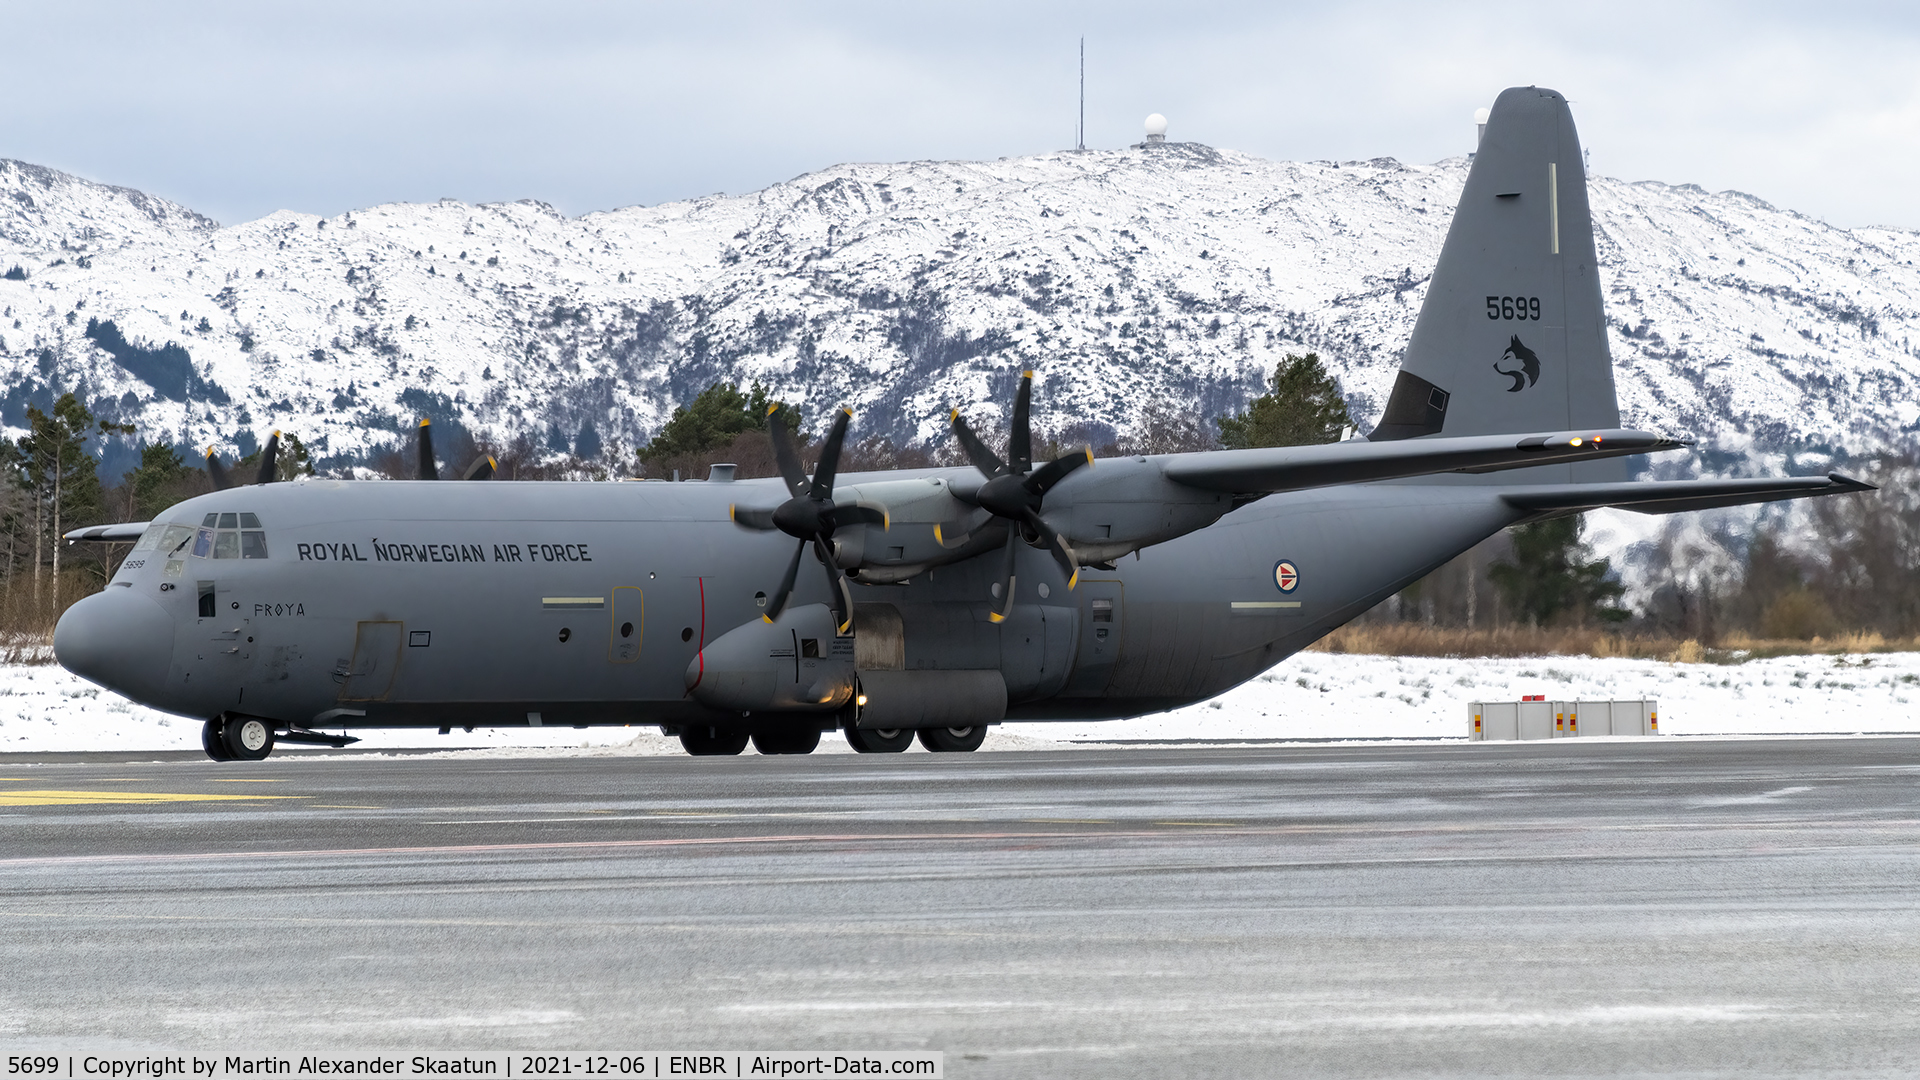 5699, 2008 Lockheed Martin C-130J-30 Super Hercules C/N 382-5699, Taxying in for parking.